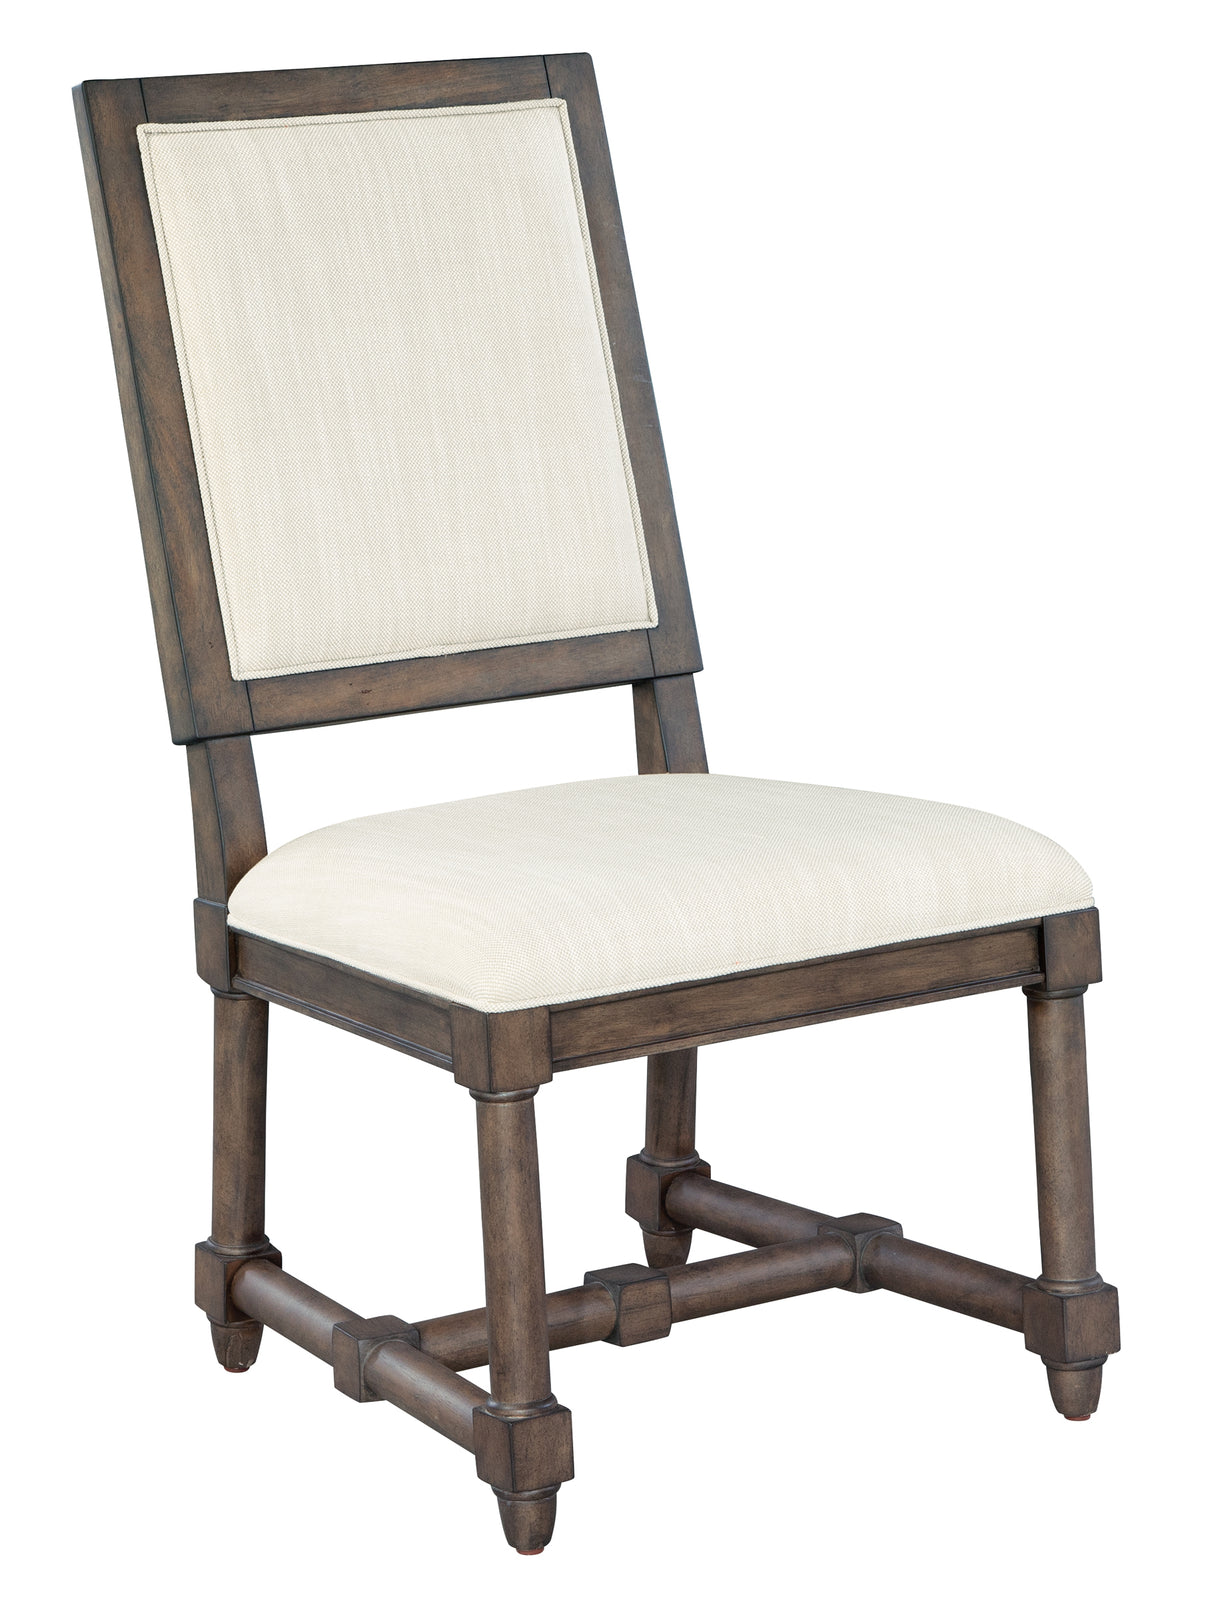 Hekman 23523 Lincoln Park 22.25in. x 26.5in. x 42in. Upholstered Dining Side Chair